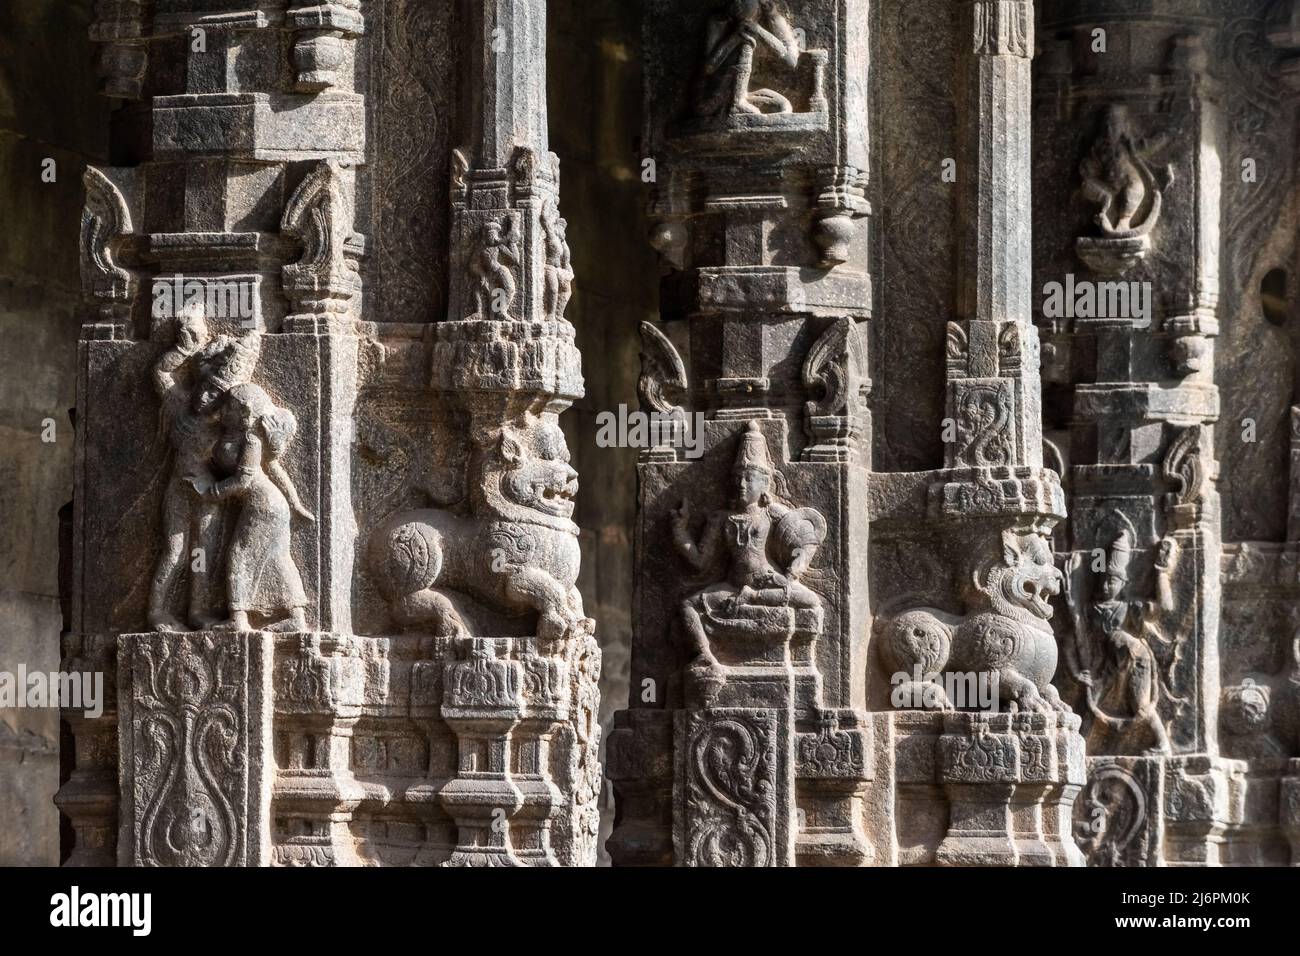 Beautiful stone carvings on the pillars and walls of the ancient Hindu temple of Jalakandeswarar in the Vellore Fort. Stock Photo